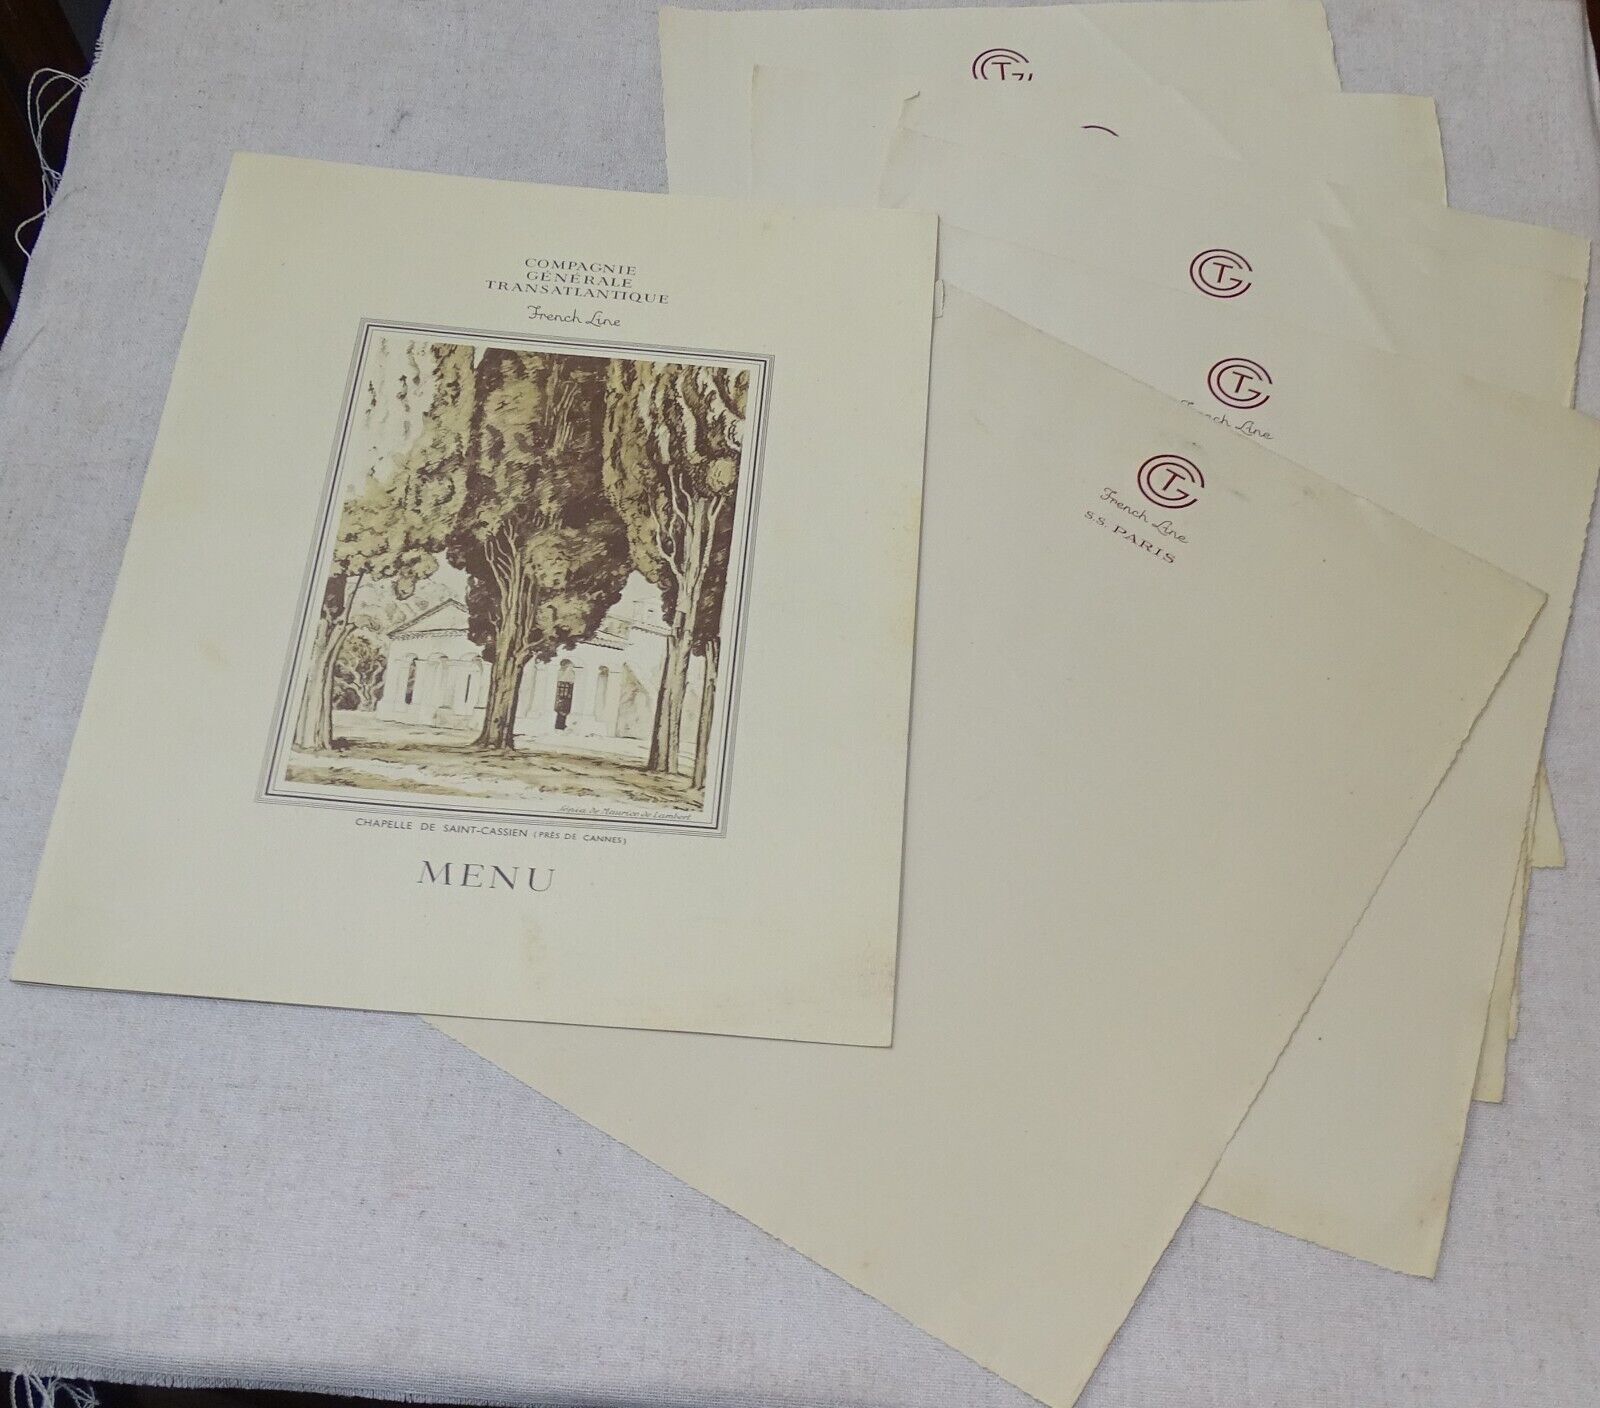 CGT French Line 1937 Dinner Menu & 6 unused sheets of stationery paper